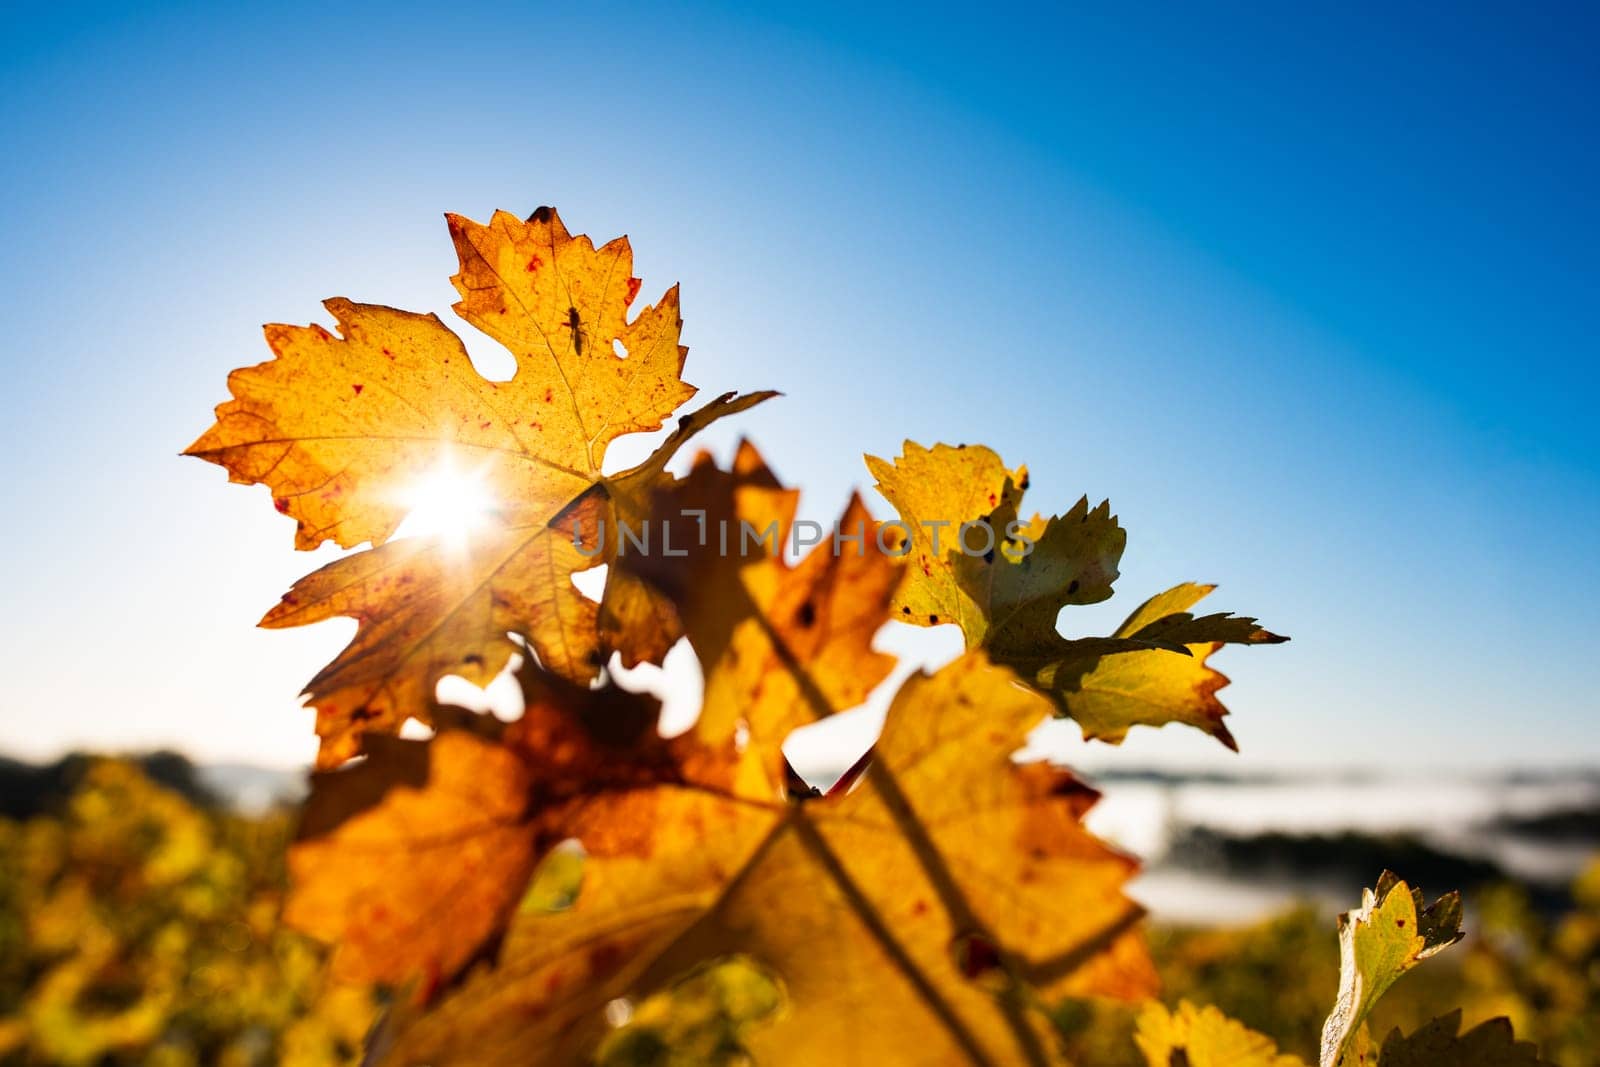 Colourful vine leaves in the autumn, Bordeaux vineyard by FreeProd